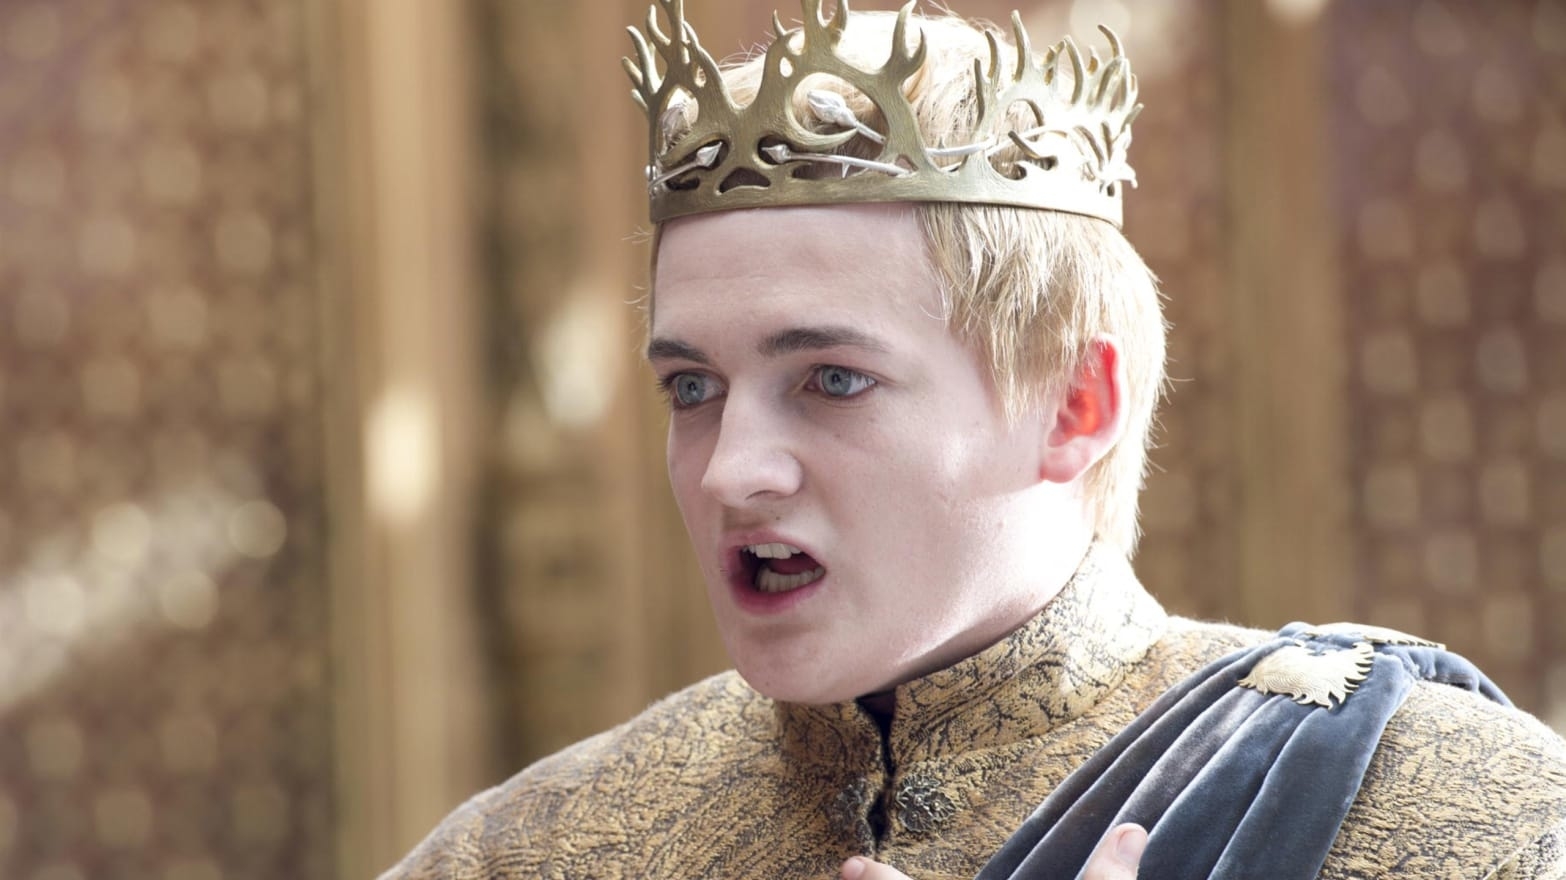 King Joffrey from Game of Thrones wearing a crown and royal attire, looking surprised